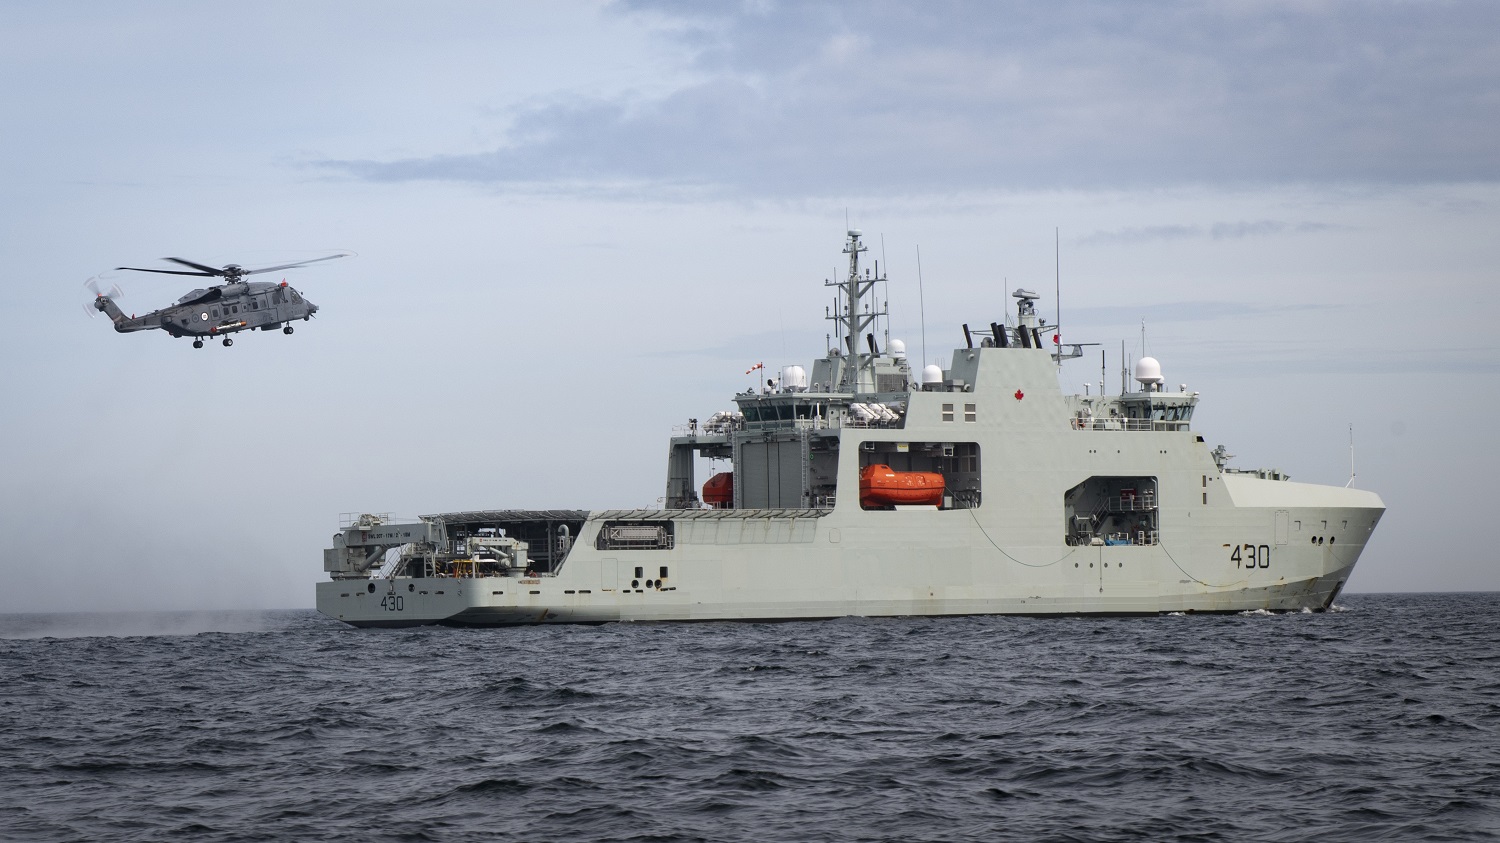 CH148819 Cyclone from 12 Wing Shearwater flies off the stern of HMCS HARRY DEWOLF during Phase 4 Shipboard Helicopter Operating Limits off the coast of Nova Scotia on June 3, 2021.